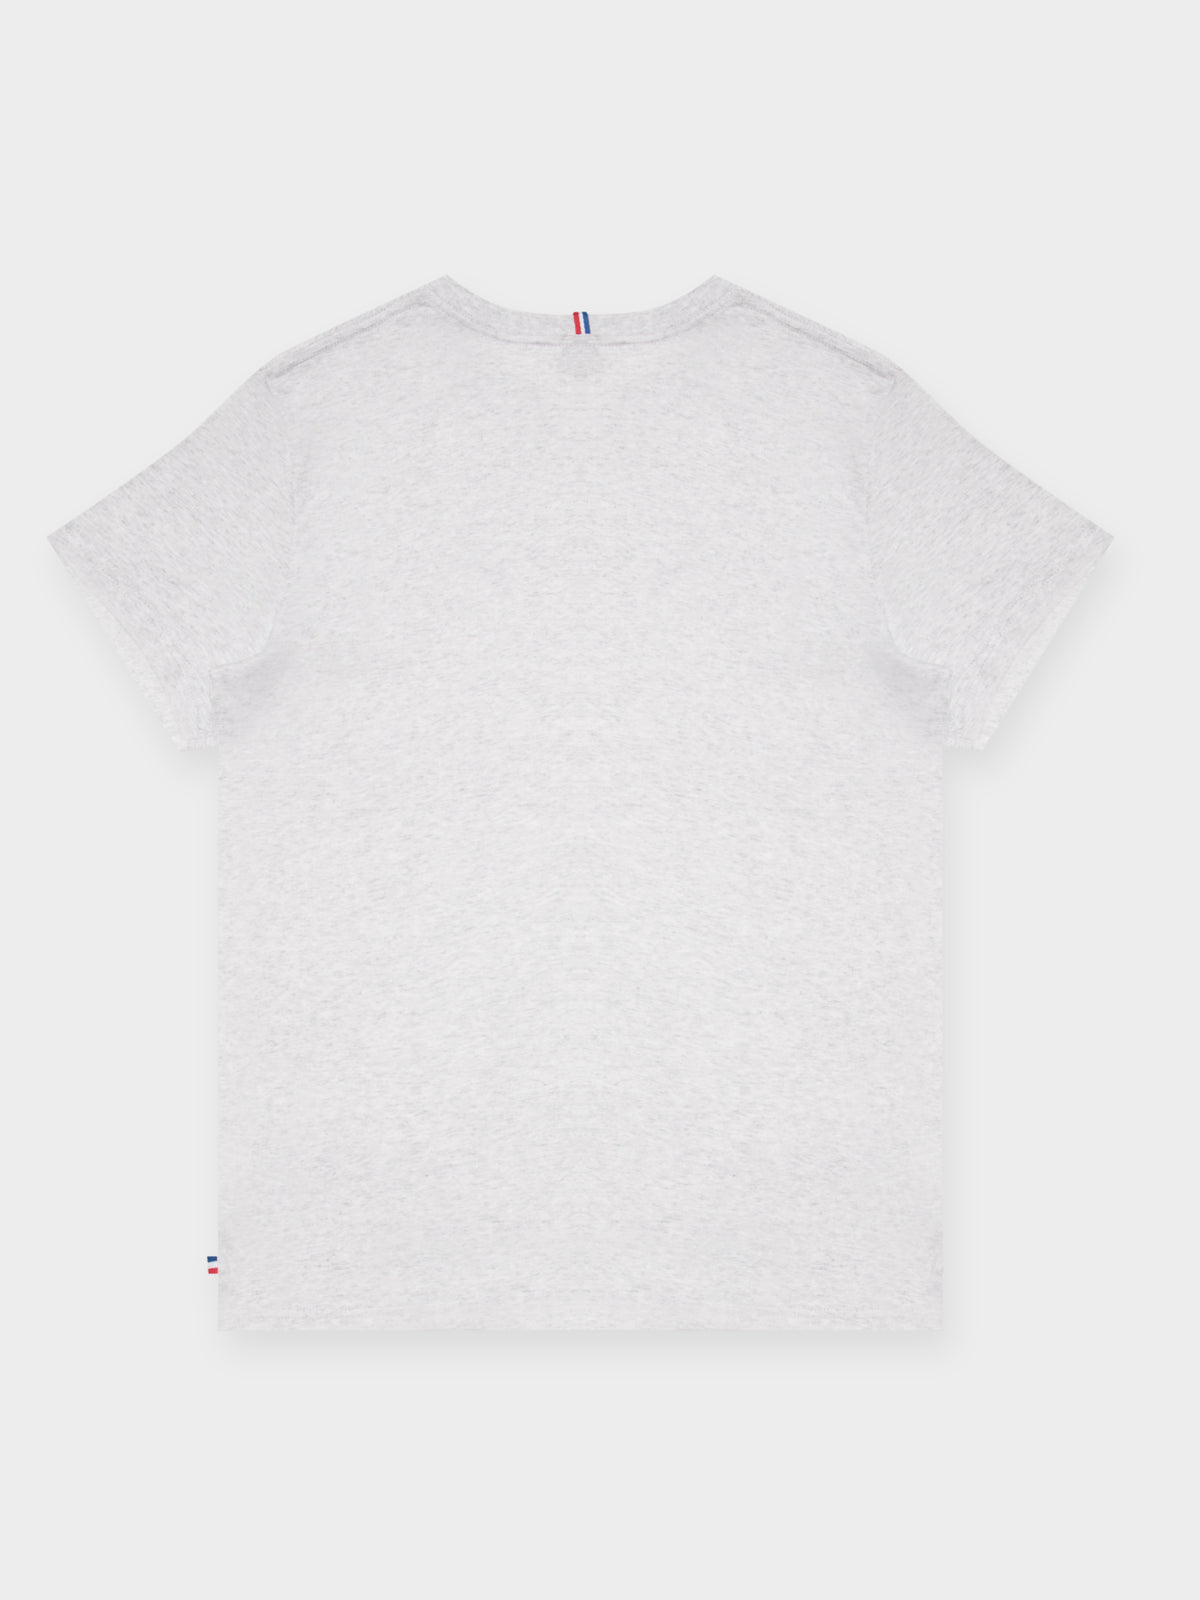 Victor T-Shirt in Snow Marle